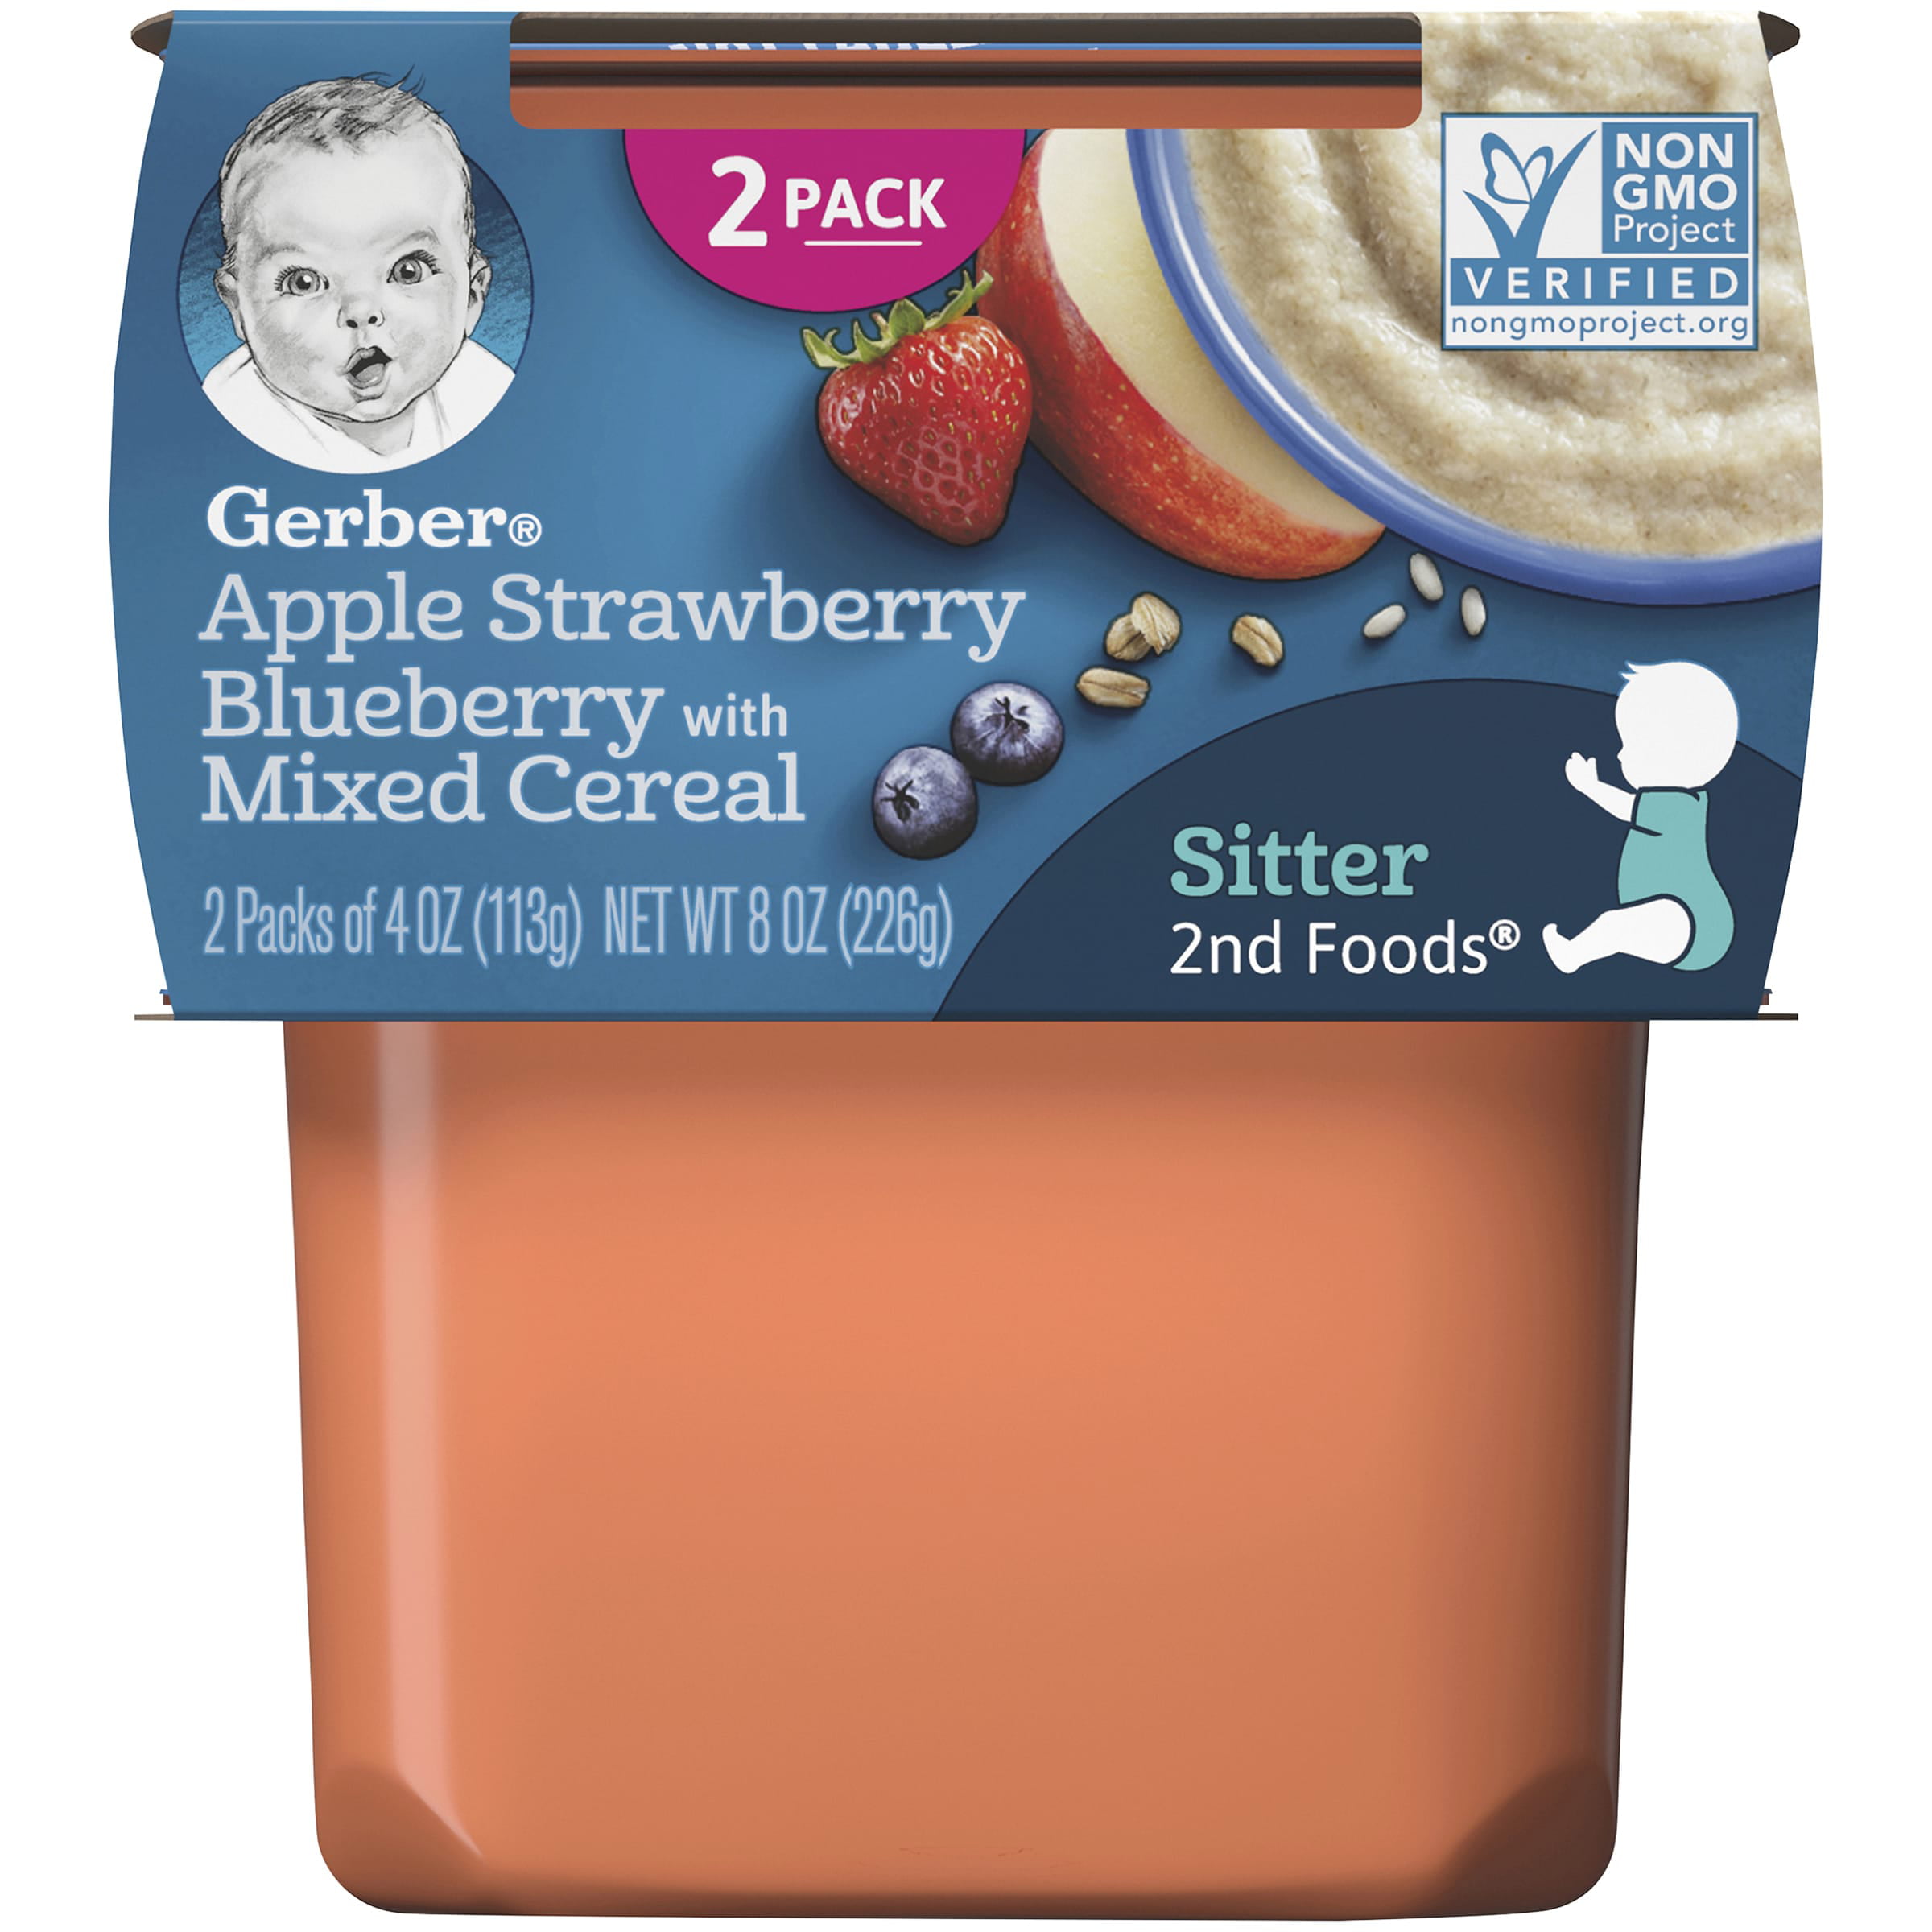 Gerber 2nd Foods Baby Food, Apple Strawberry Blueberry With Mixed Cereal, 4 oz Tubs (2 Pack)